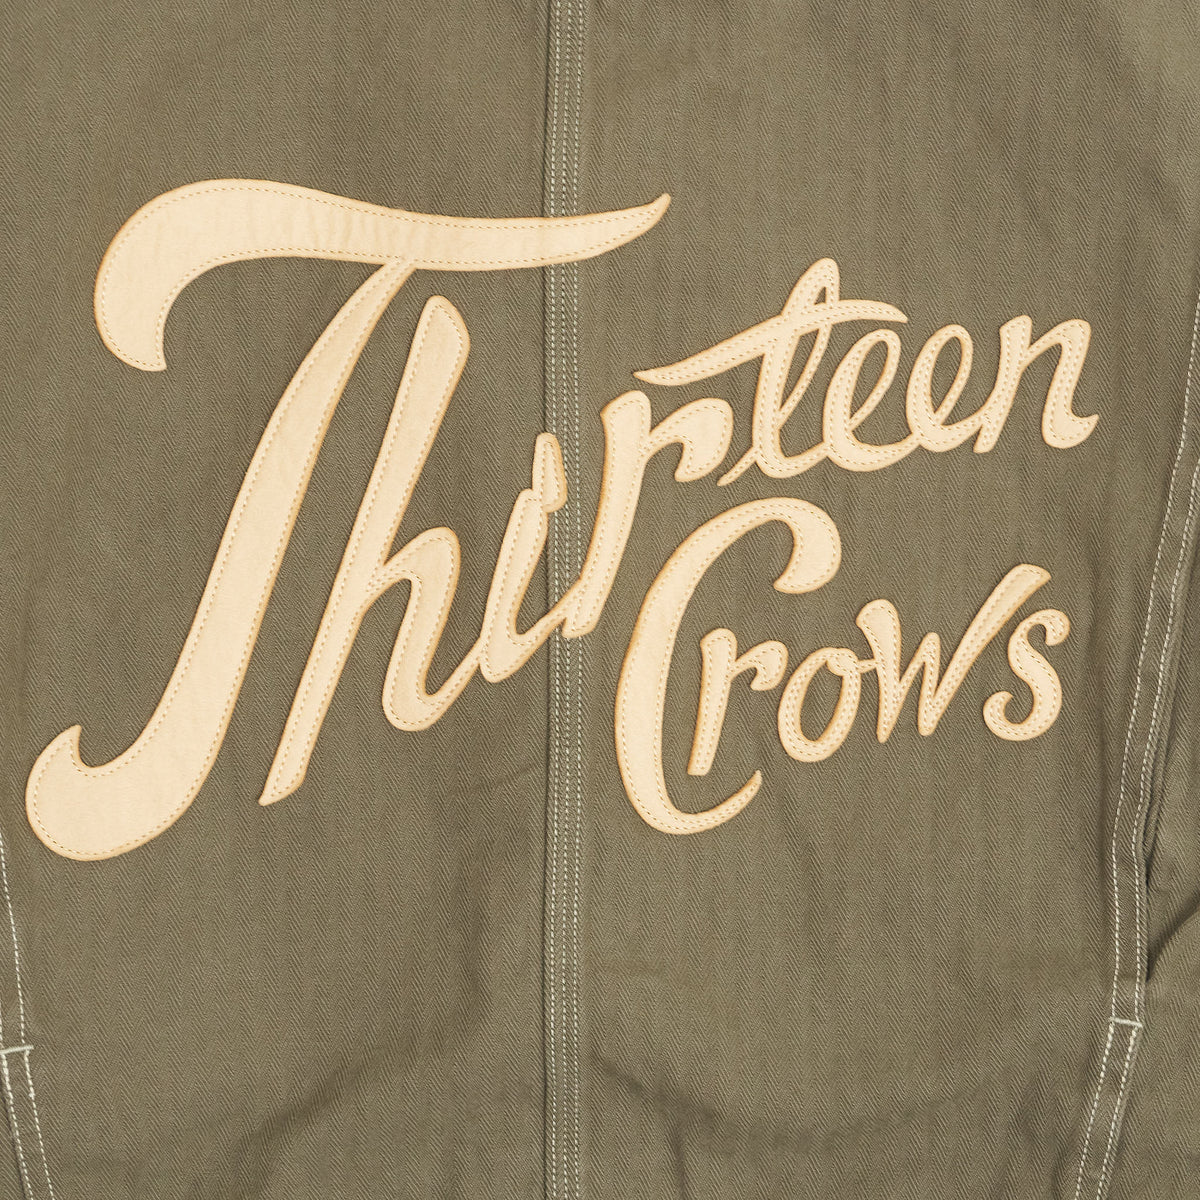 Old Crow Speed Shop by Glad Hand &amp; Co. Overall Thirteen Crows